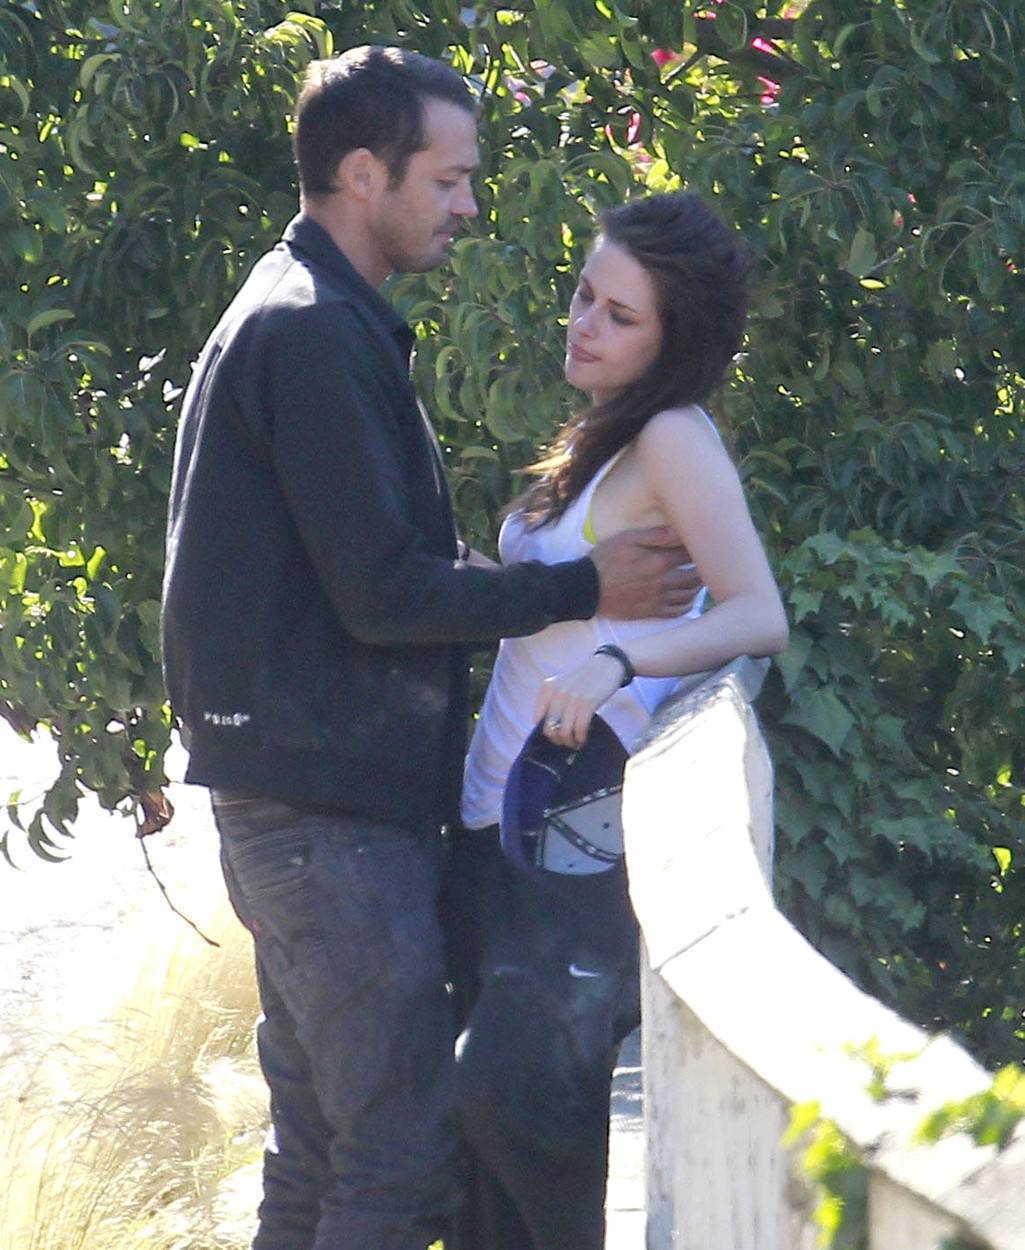 Exclusive... Kristen Stewart Cheats On Rob! NO INTERNET USE WITHOUT PRIOR AGREEMENT